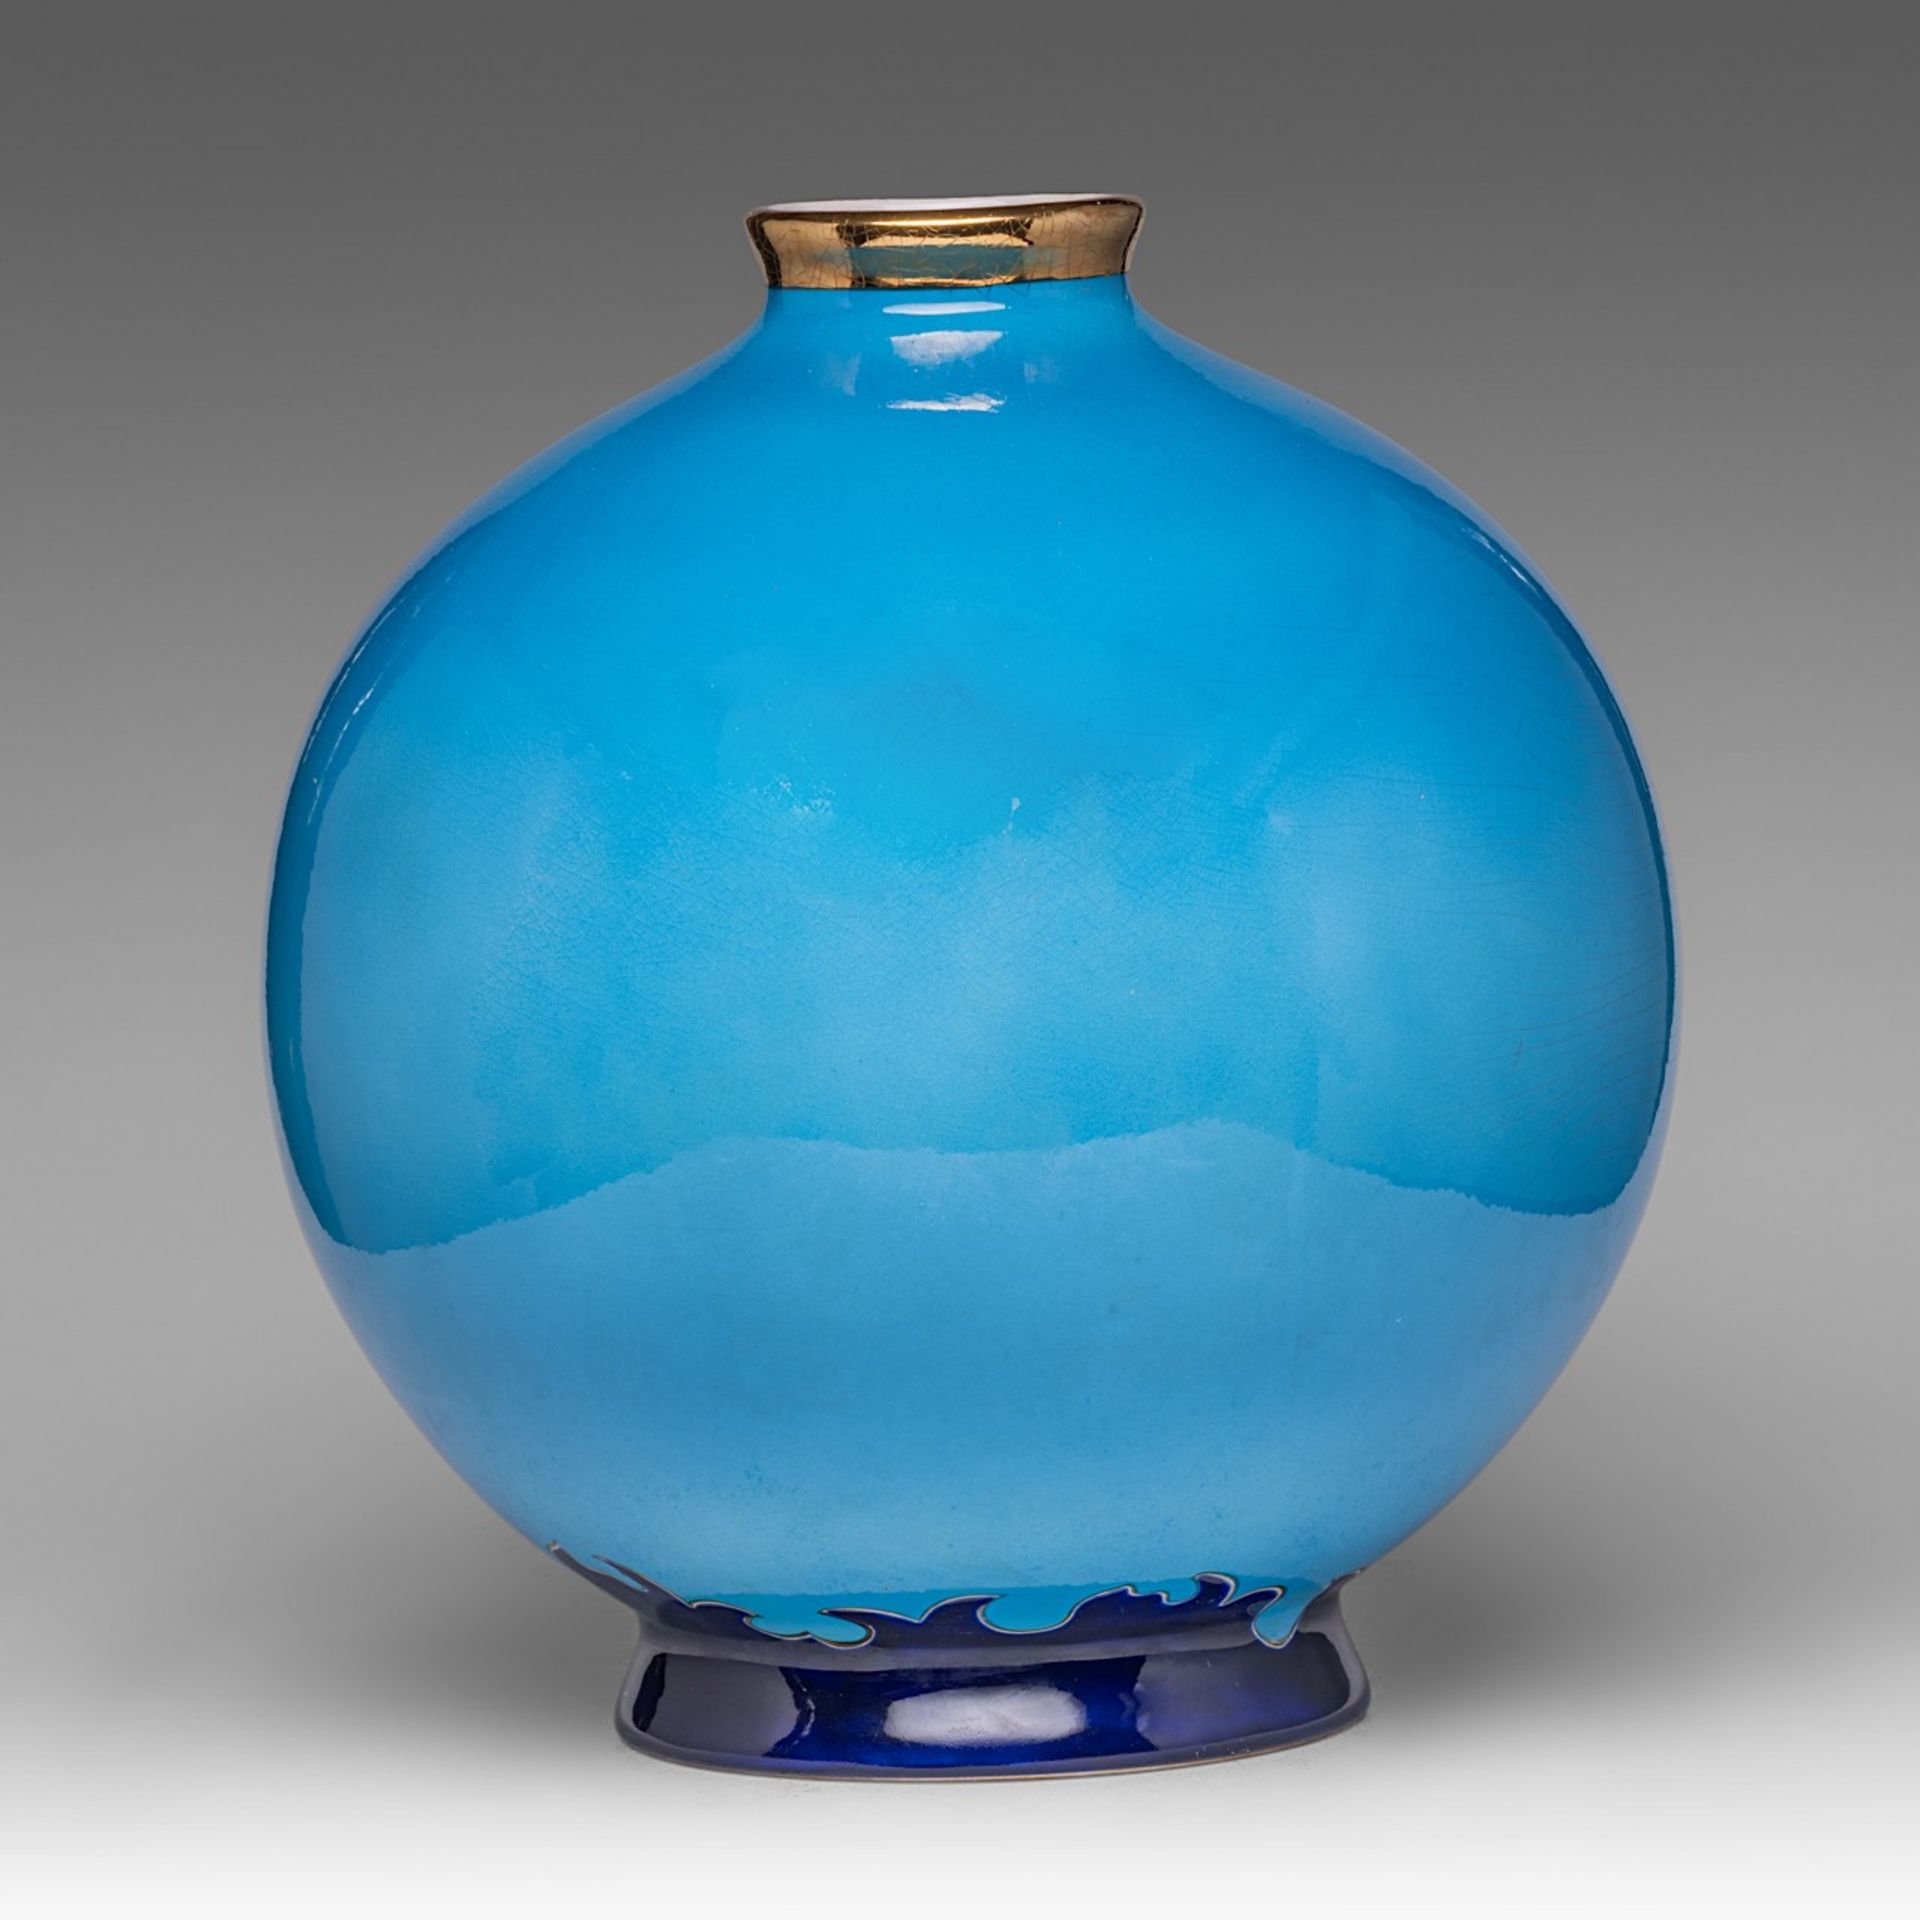 A large 'New York' circular vase by Longwy, limited edition, Ndeg 29/50, H 40 cm - Image 3 of 7